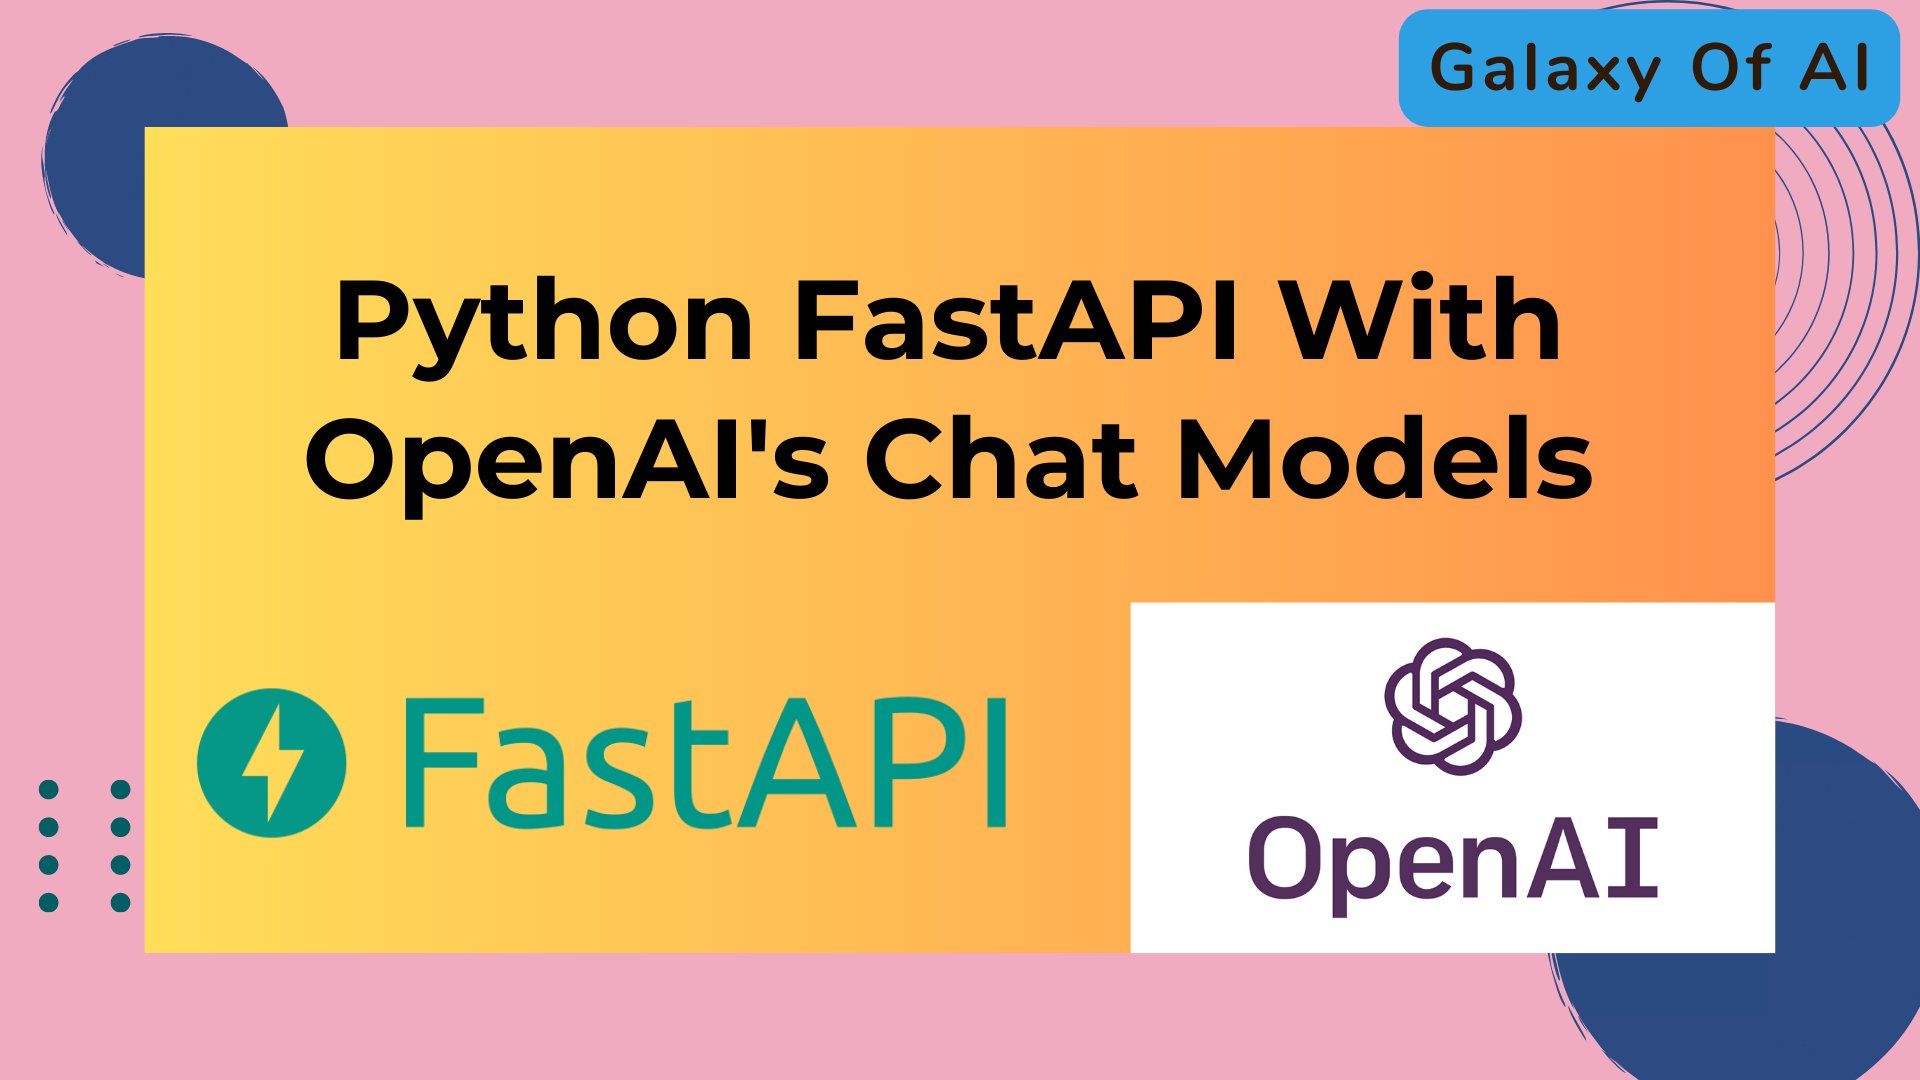 This post discusses how we create Python FastAPI With OpenAI's Chat Models. Here, we will explore how to combine the flexibility and efficiency of Python FastAPI with the immense capabilities of OpenAI's chat models.